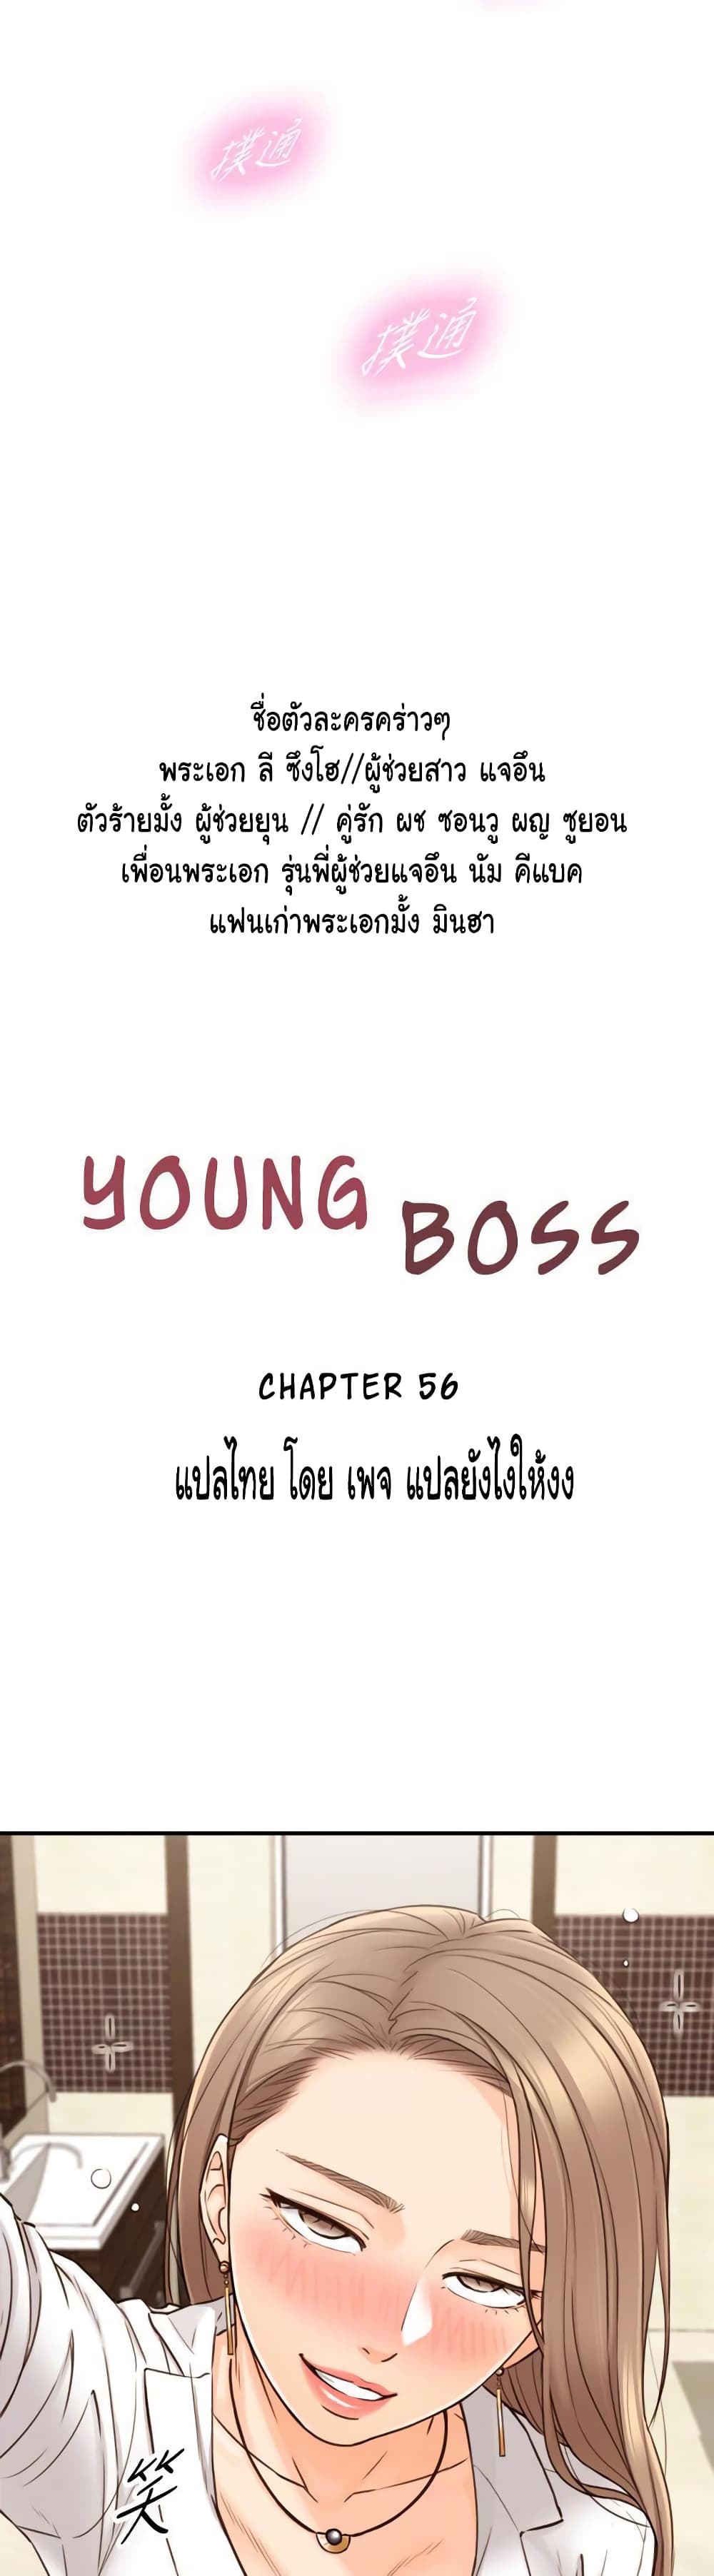 Young Boss 56 04